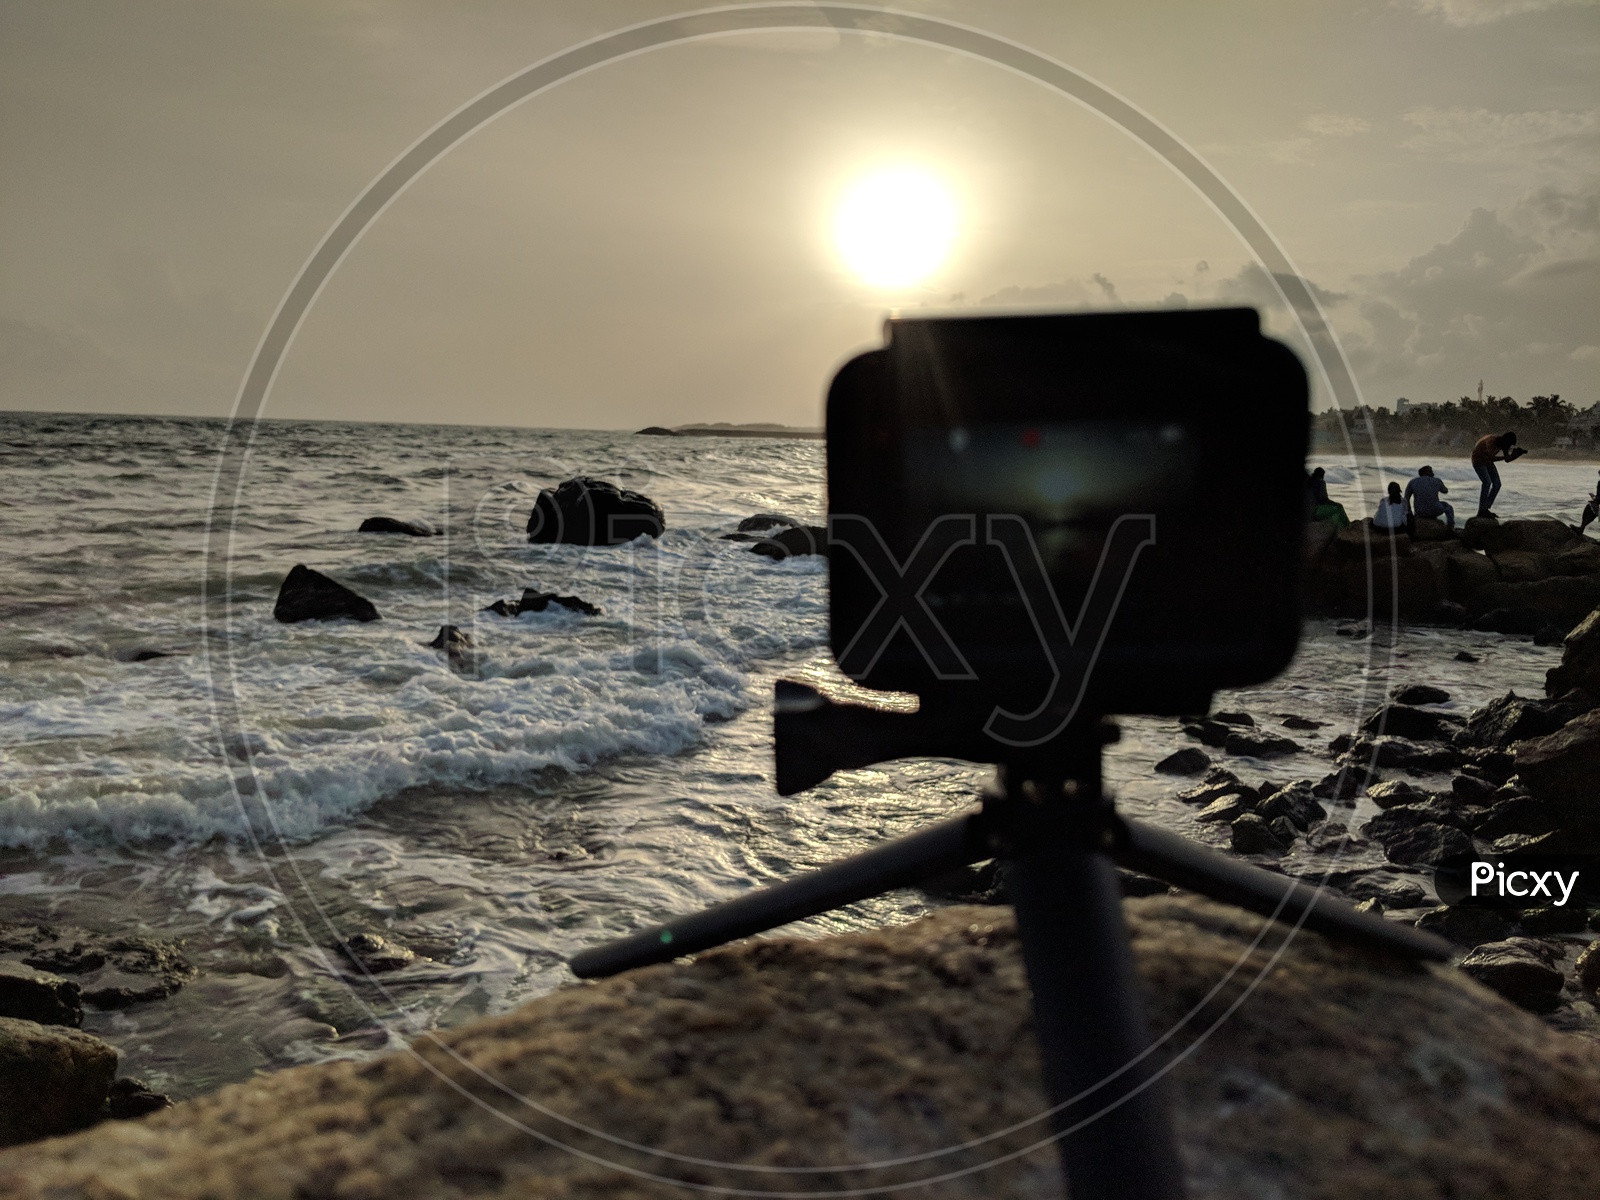 GoPro Camera by the Beach